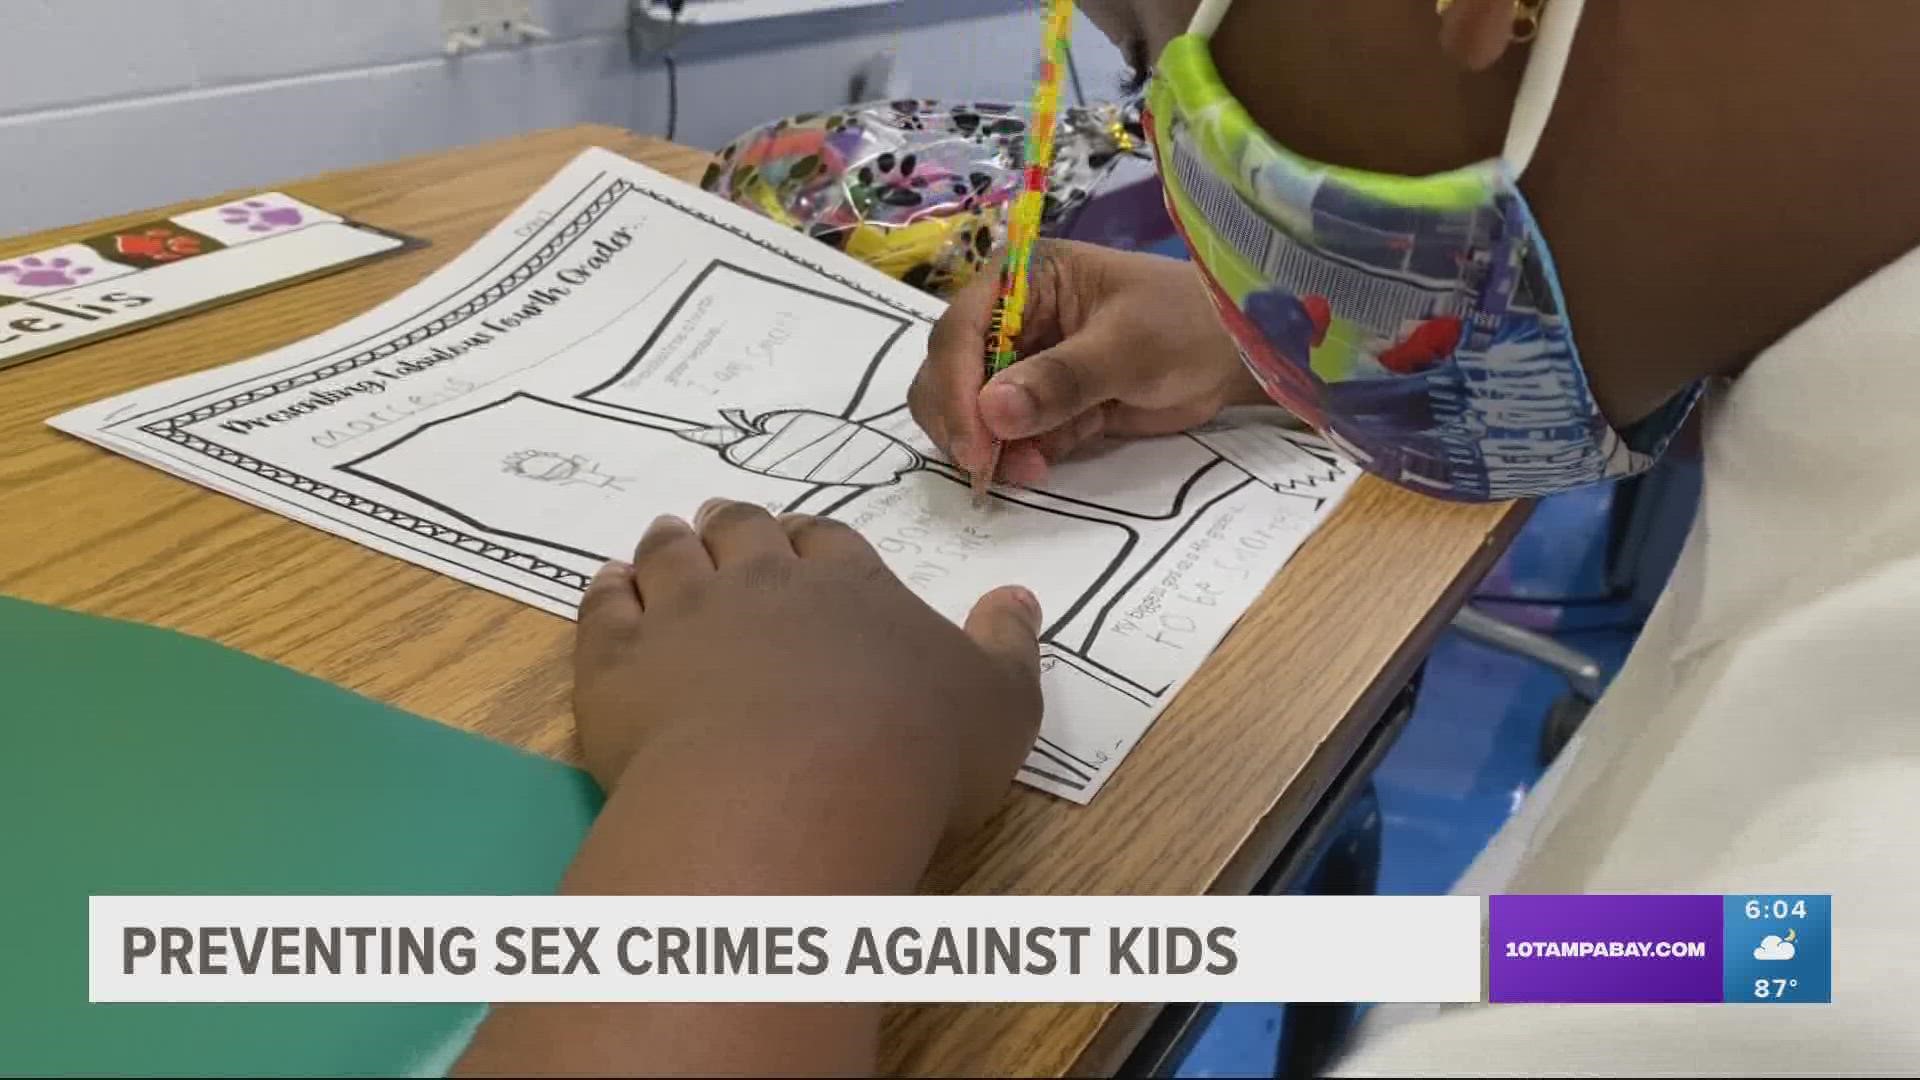 In 2019, Florida became the first state in the country to require instruction on sex trafficking in grades K-12.